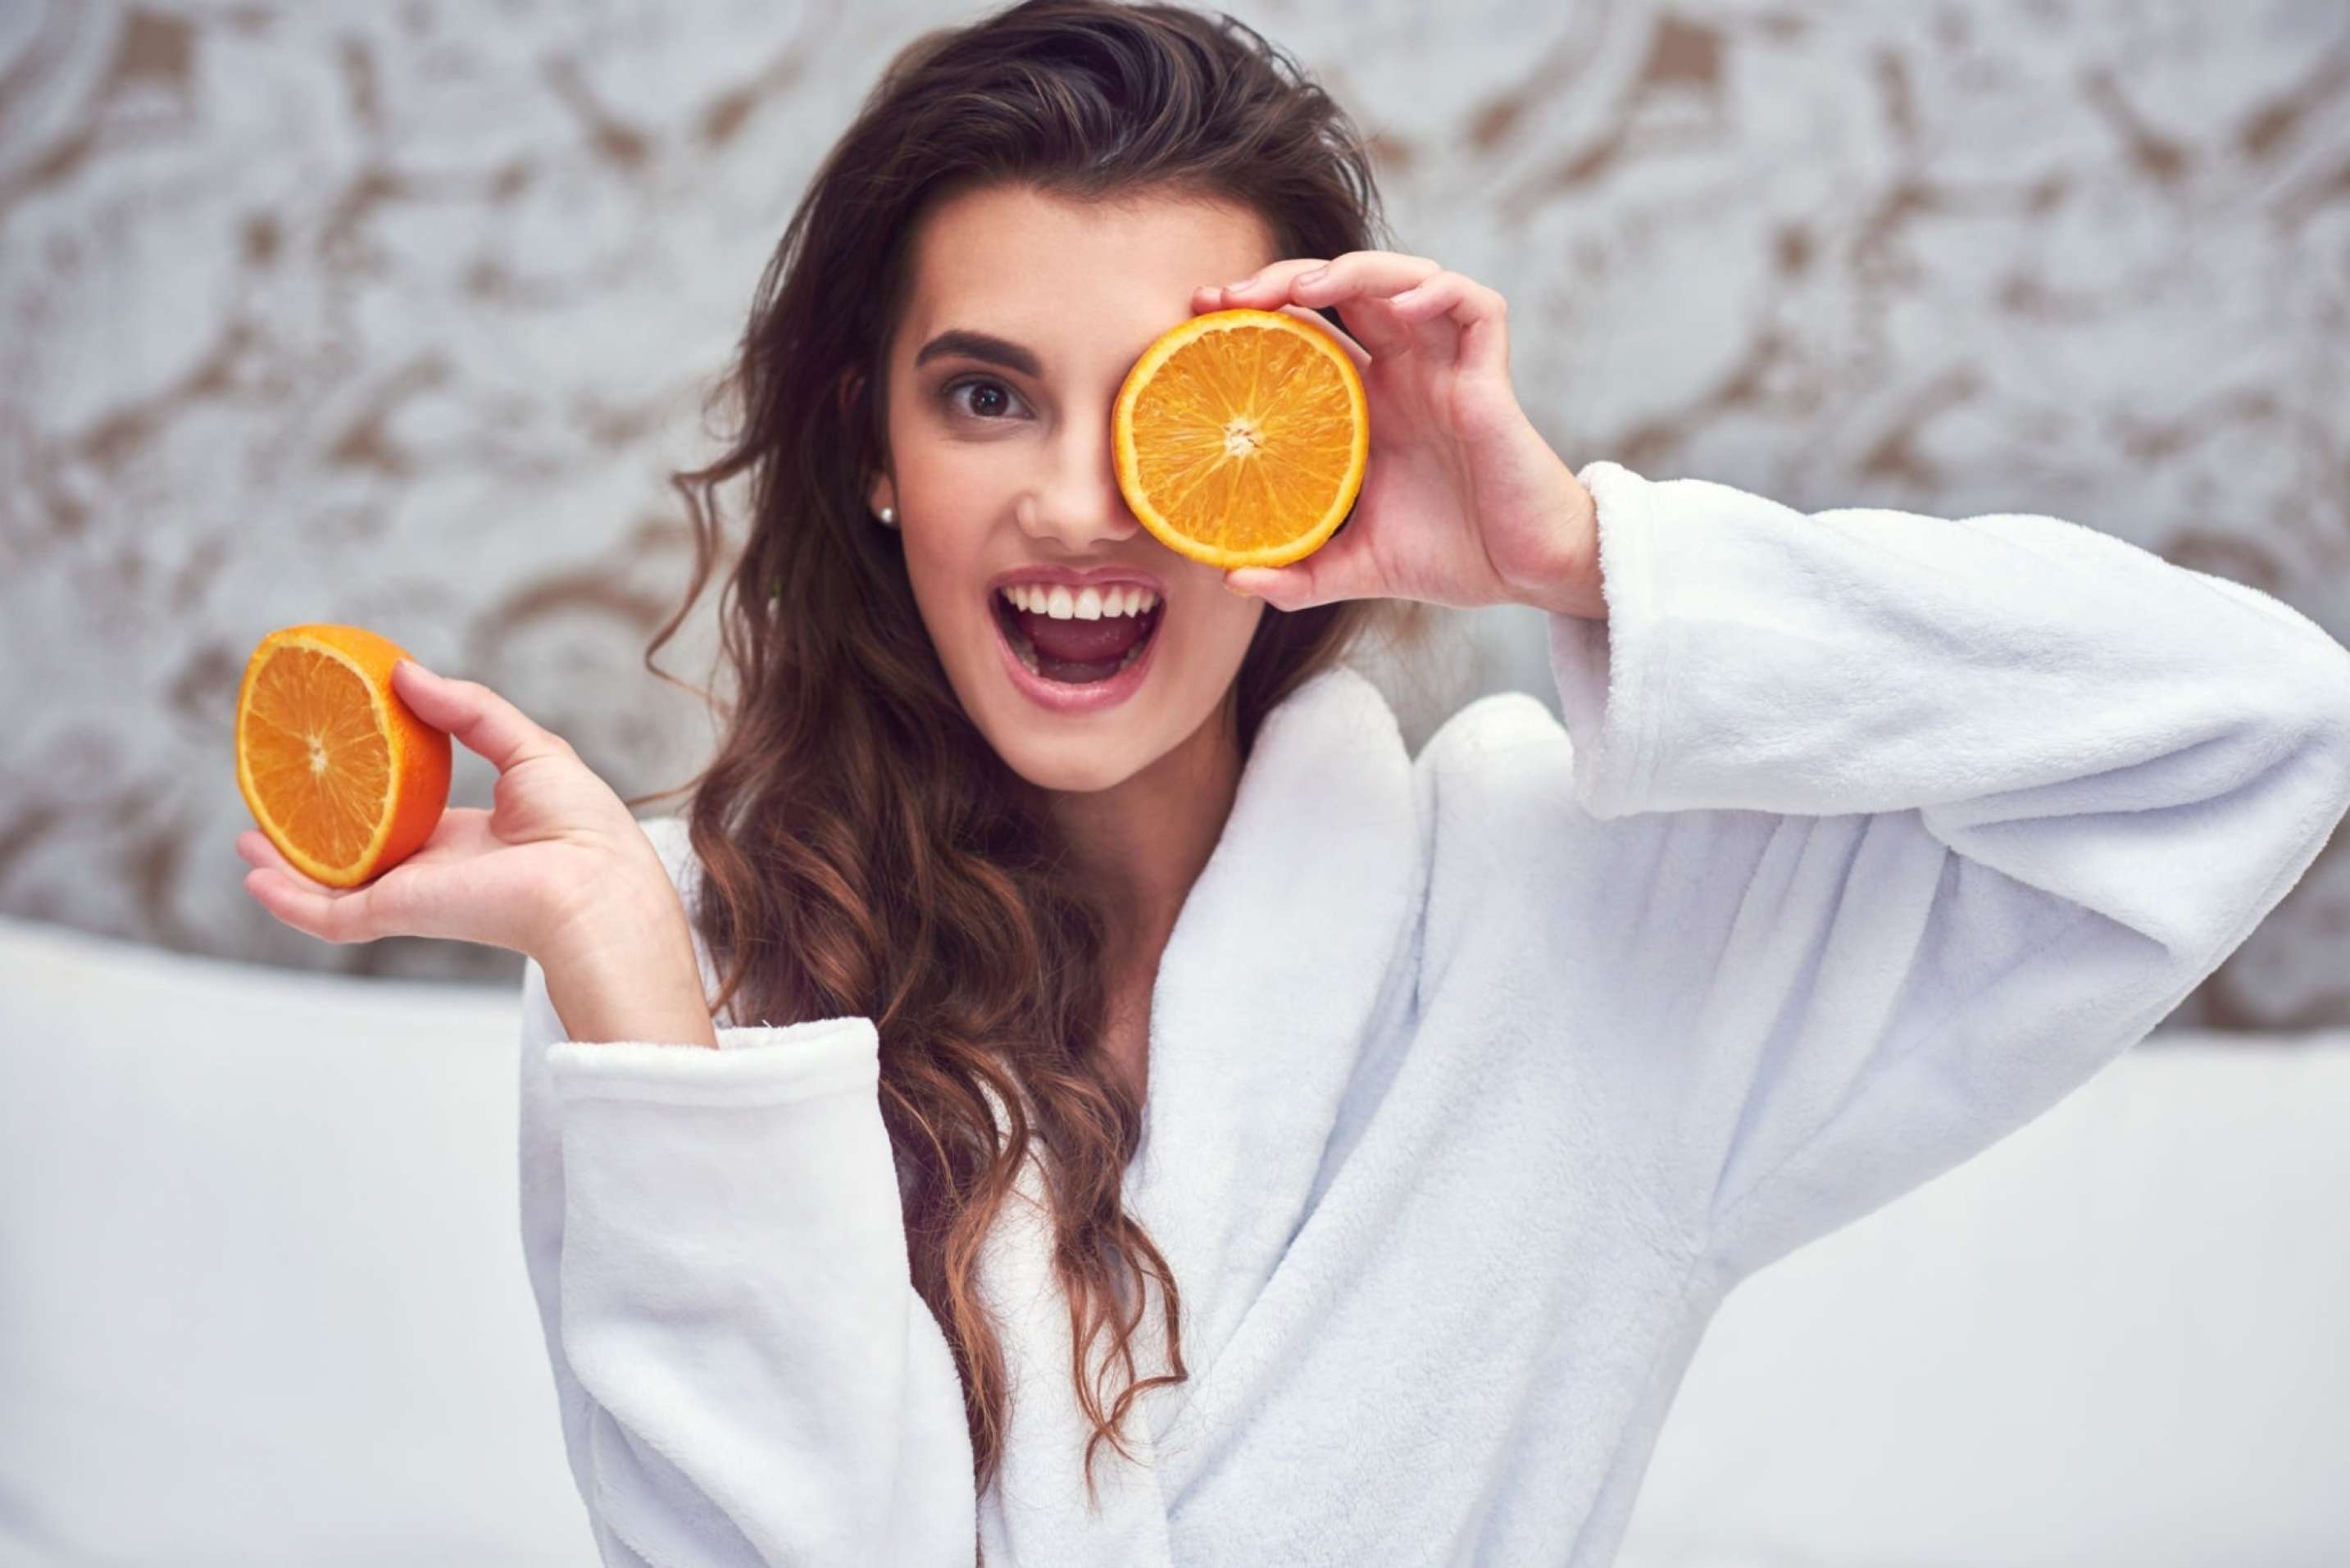 Supercharge your fertility with Vitamin C